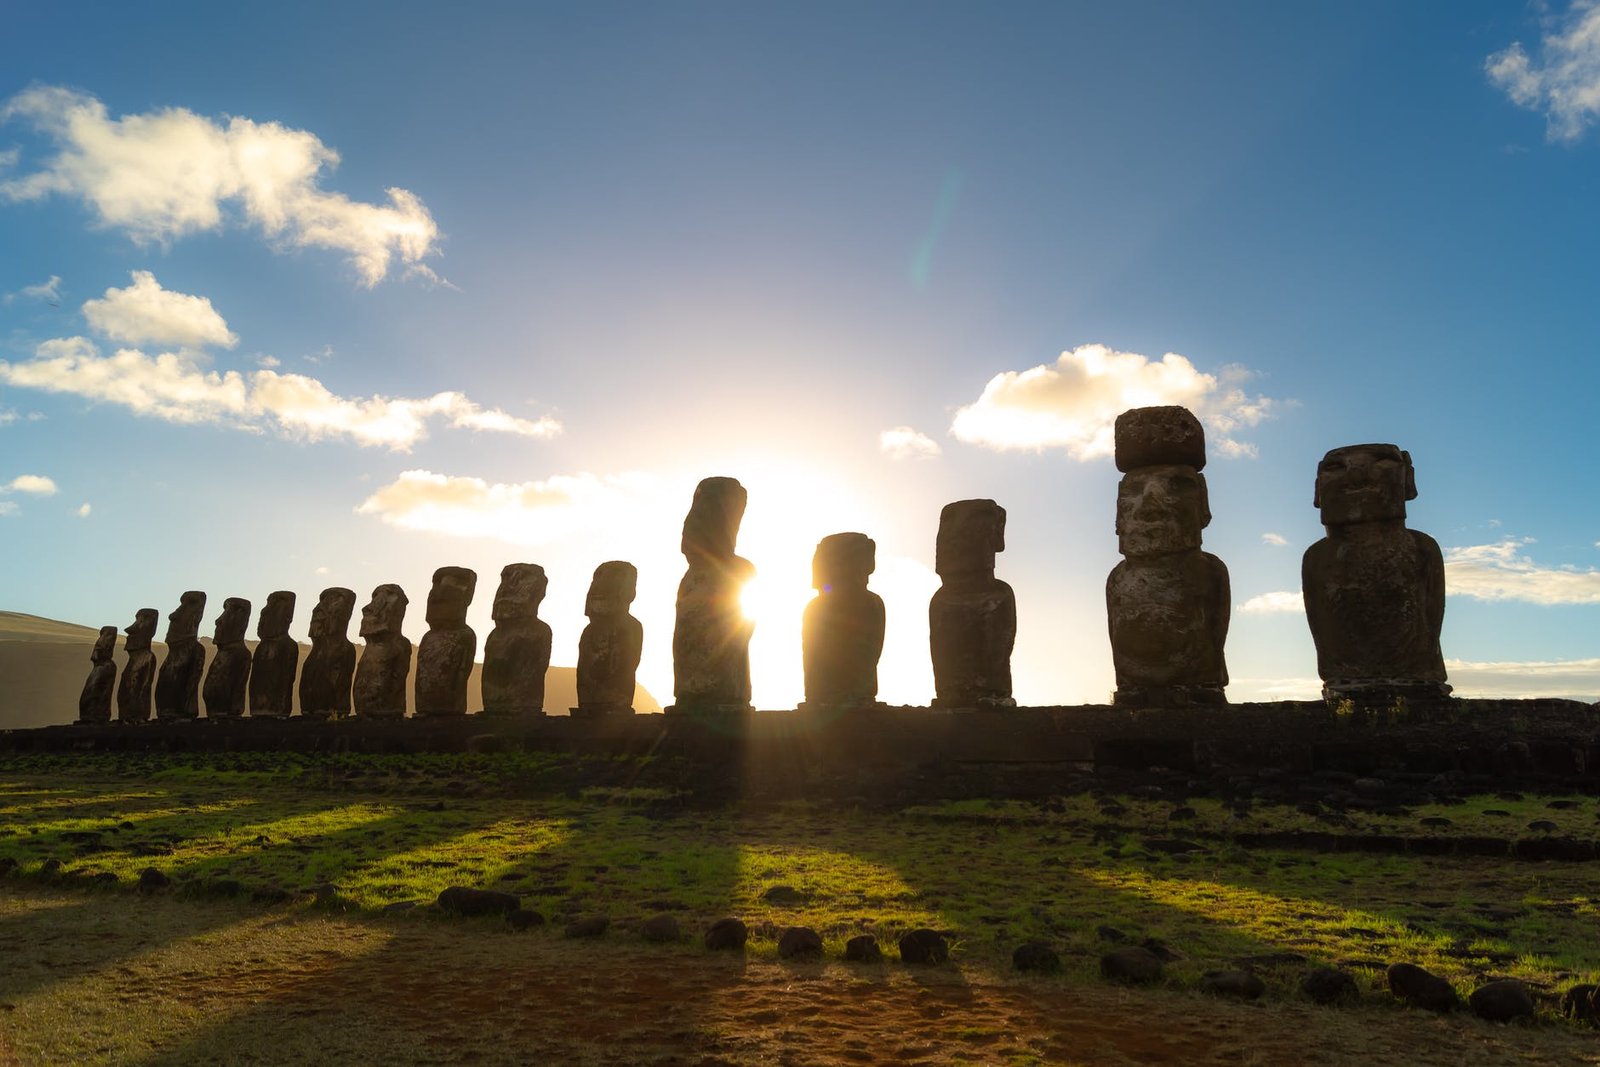 brown statues, the Mysteries of Easter Island, story of easter island,